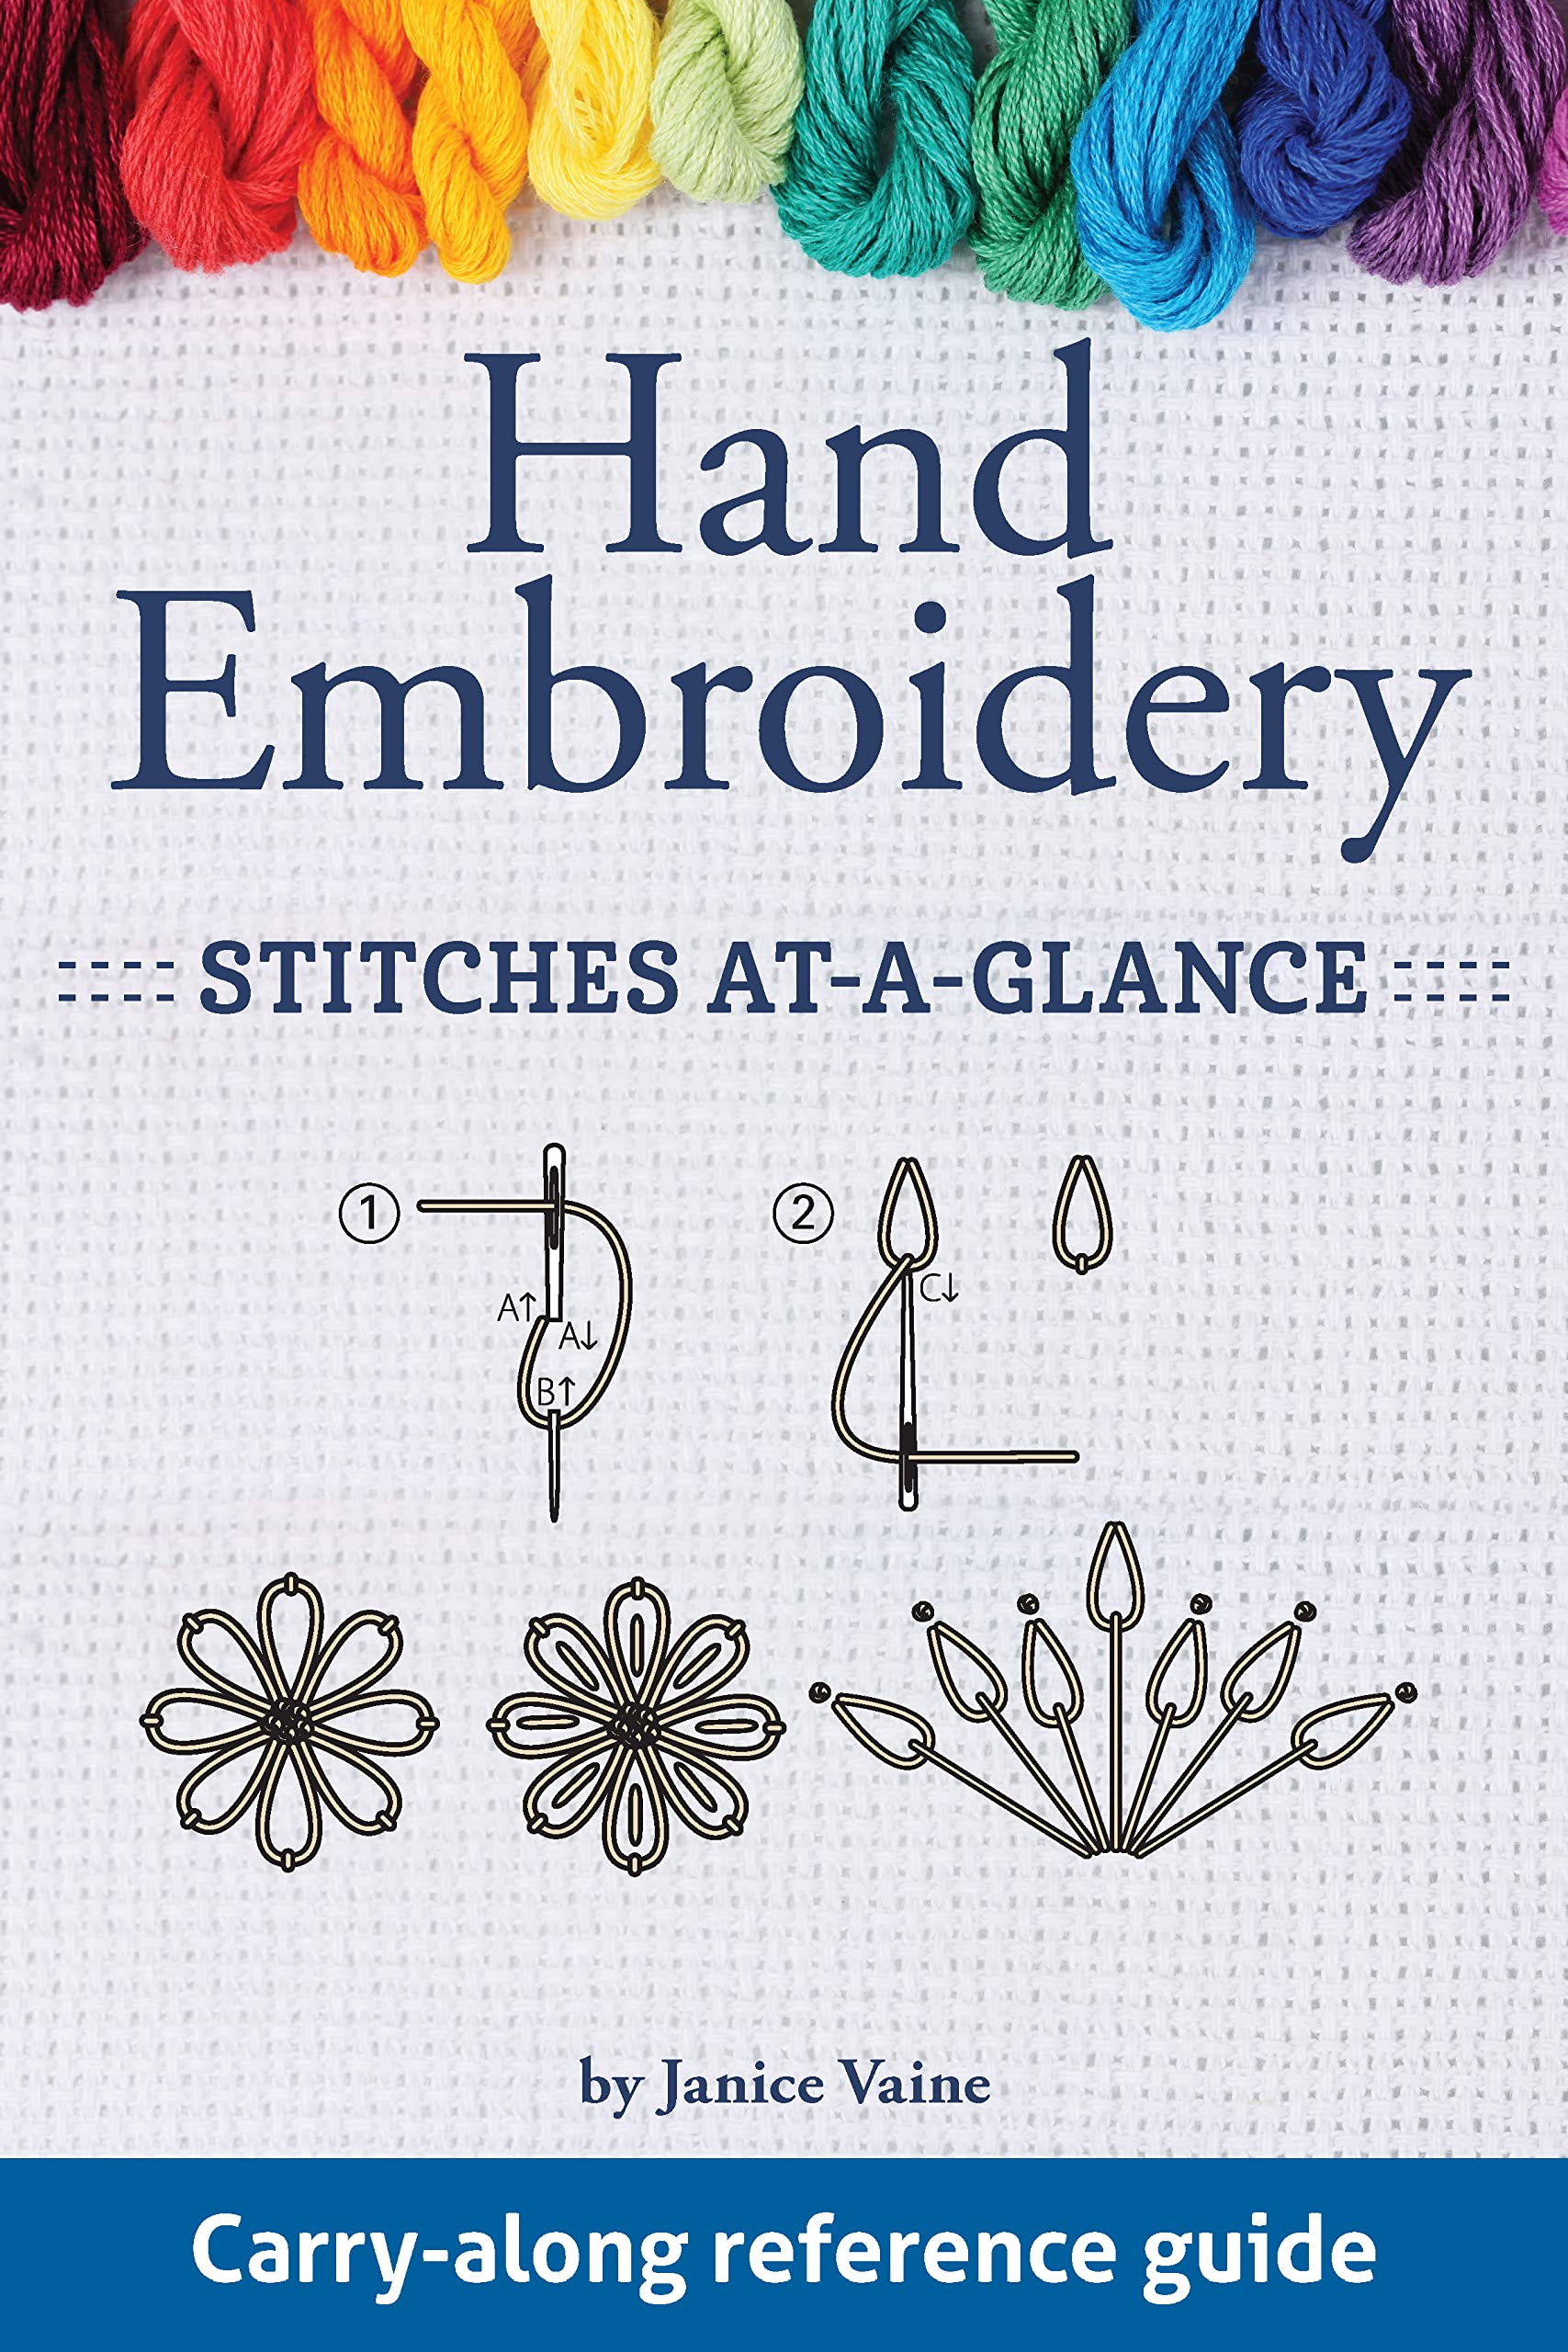 Hand Embroidery Stitches At A Glance by Janice Vaine - A Child's Dream